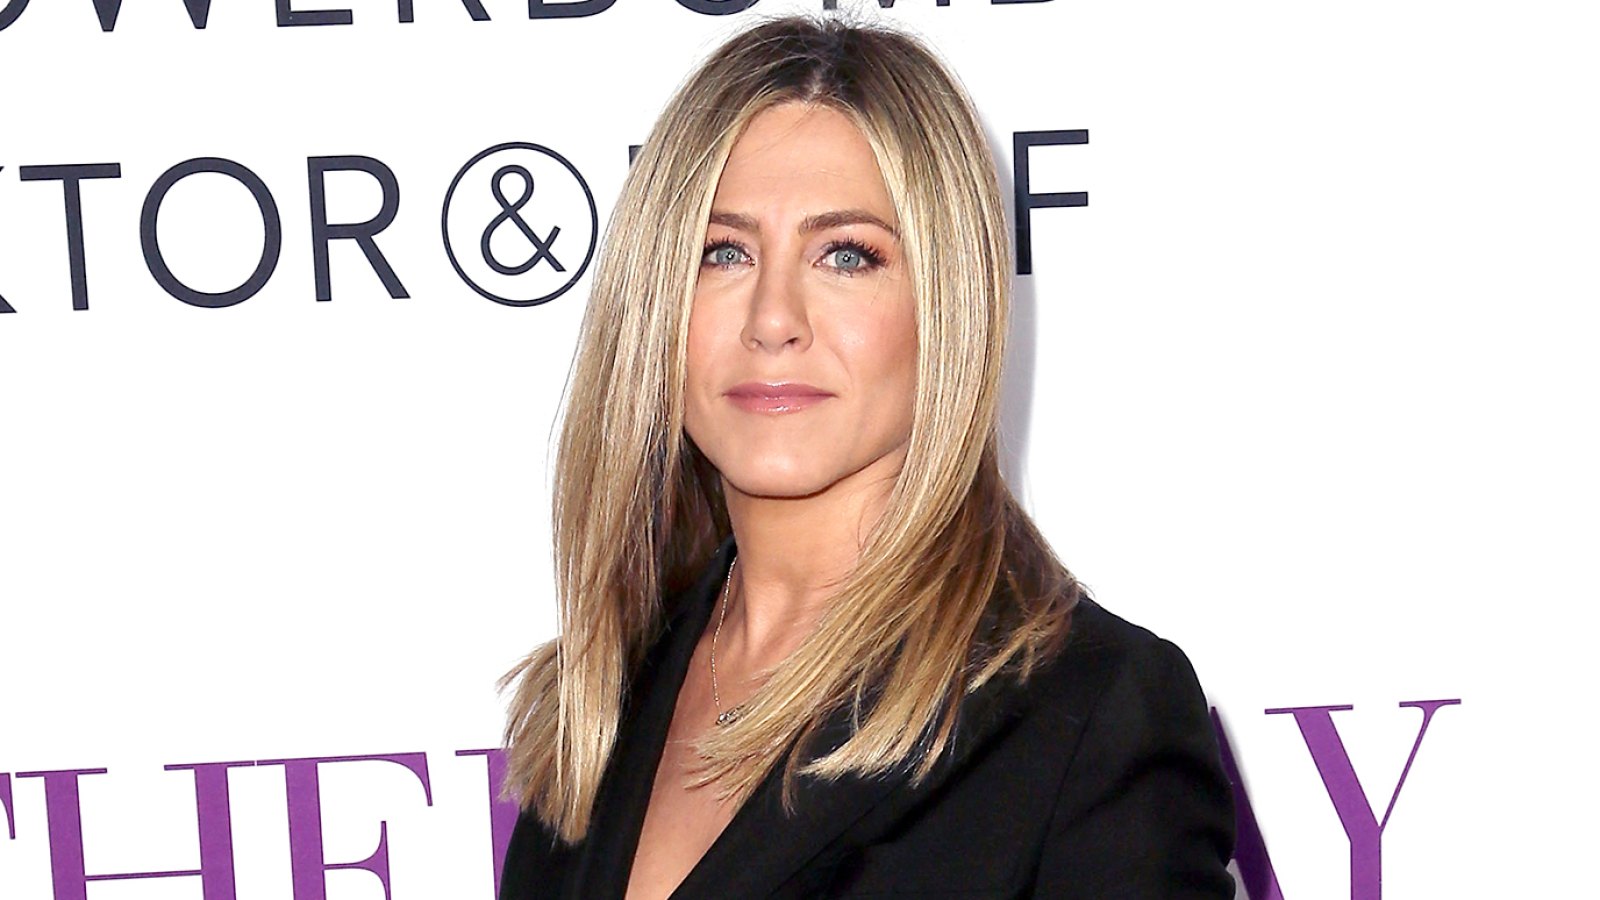 Jennifer Aniston attends the Open Roads World Premiere of "Mother's Day" at the TCL Chinese Theatre IMAX on April 13, 2016 in Hollywood, California.